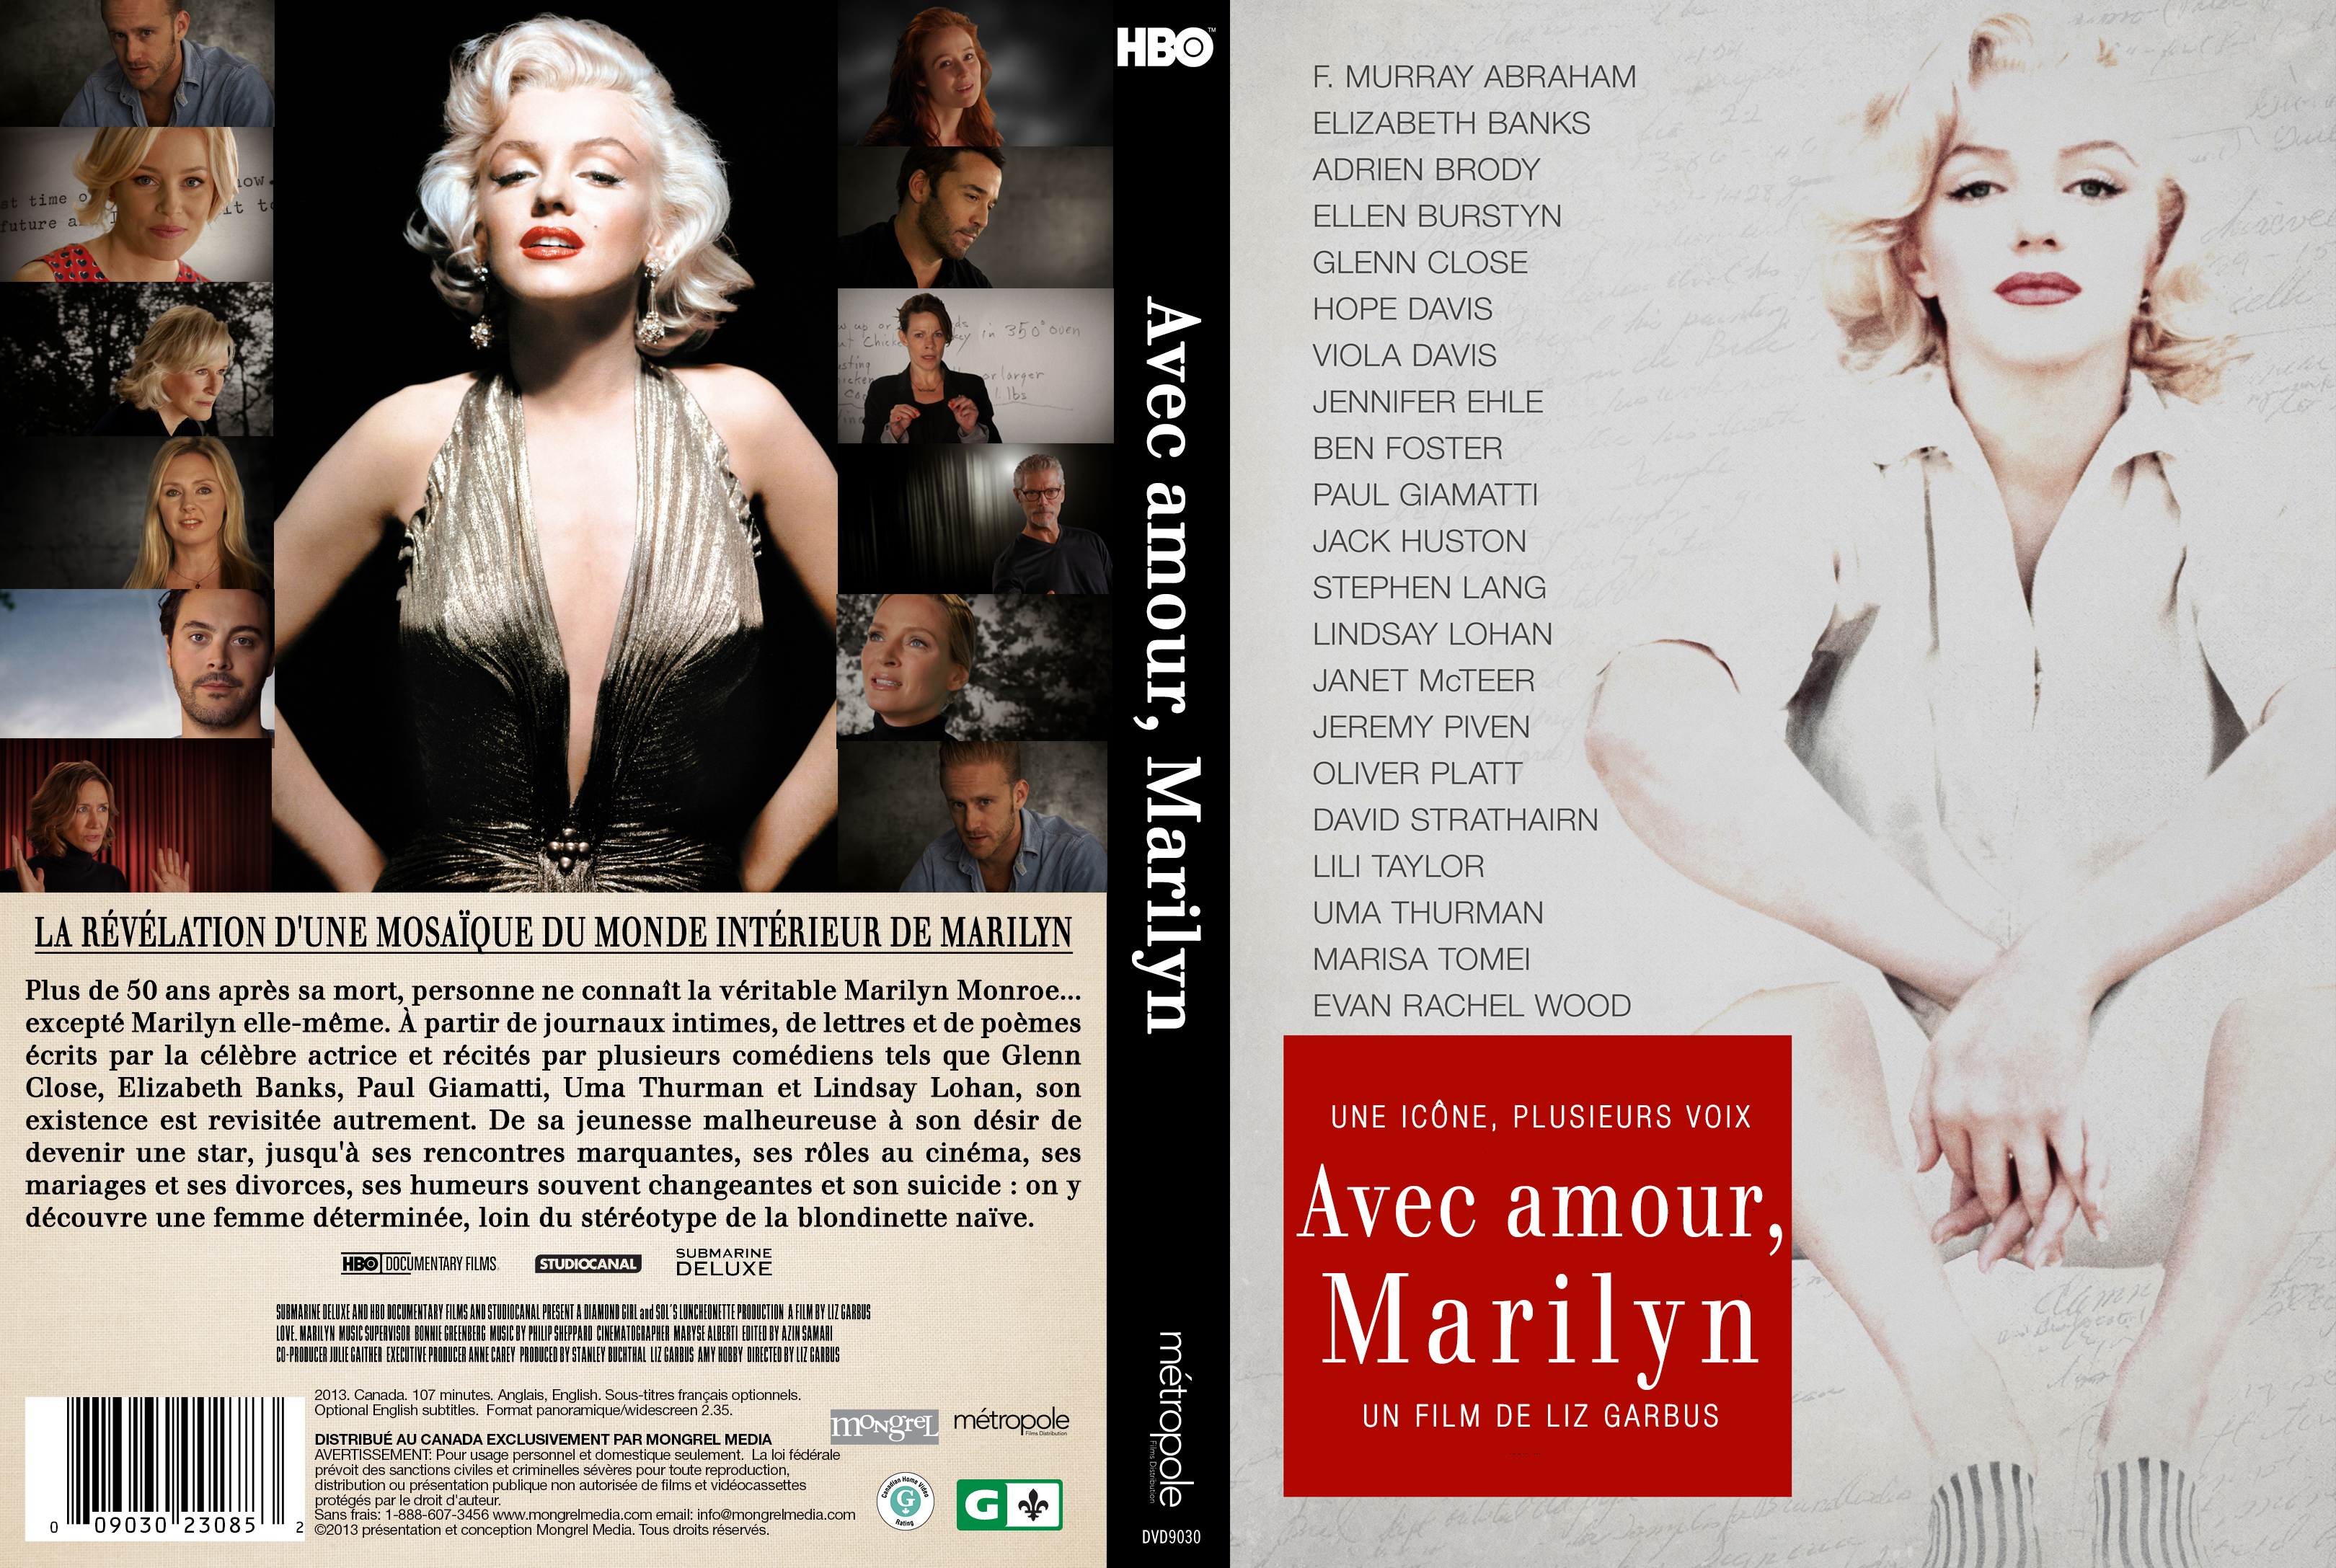 Jaquette DVD Avec amour Marilyn custom (Canadienne)